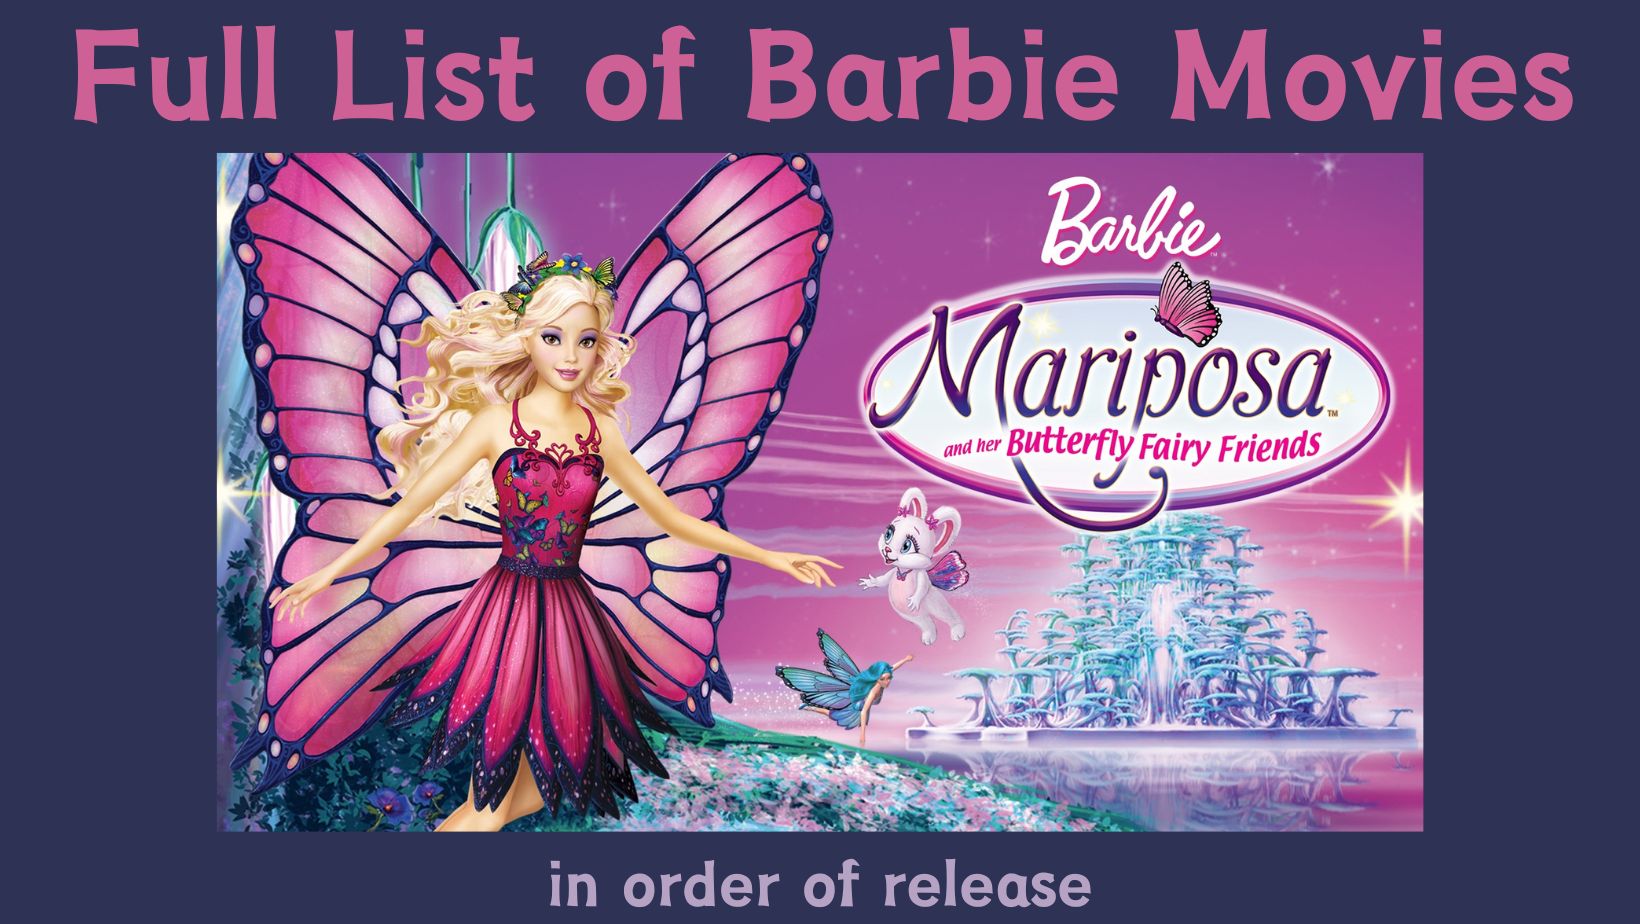 image from mariposa barbie. text "full list of barbie movies in order of release"